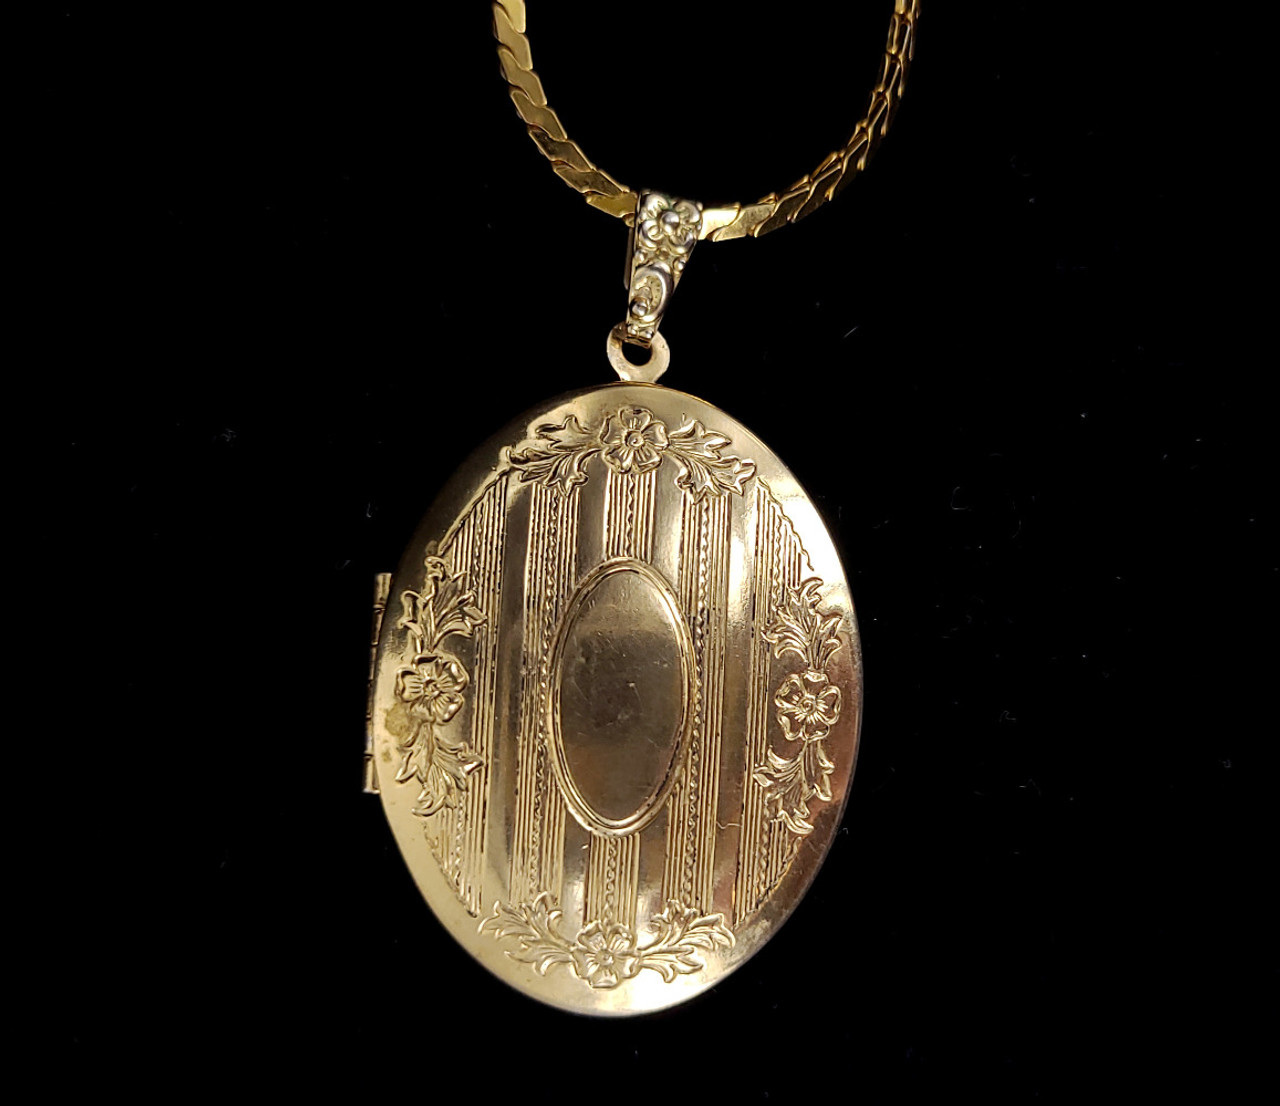 Vintage Gold Rounded Oval Locket - Necklaces from Cavendish Jewellers Ltd UK